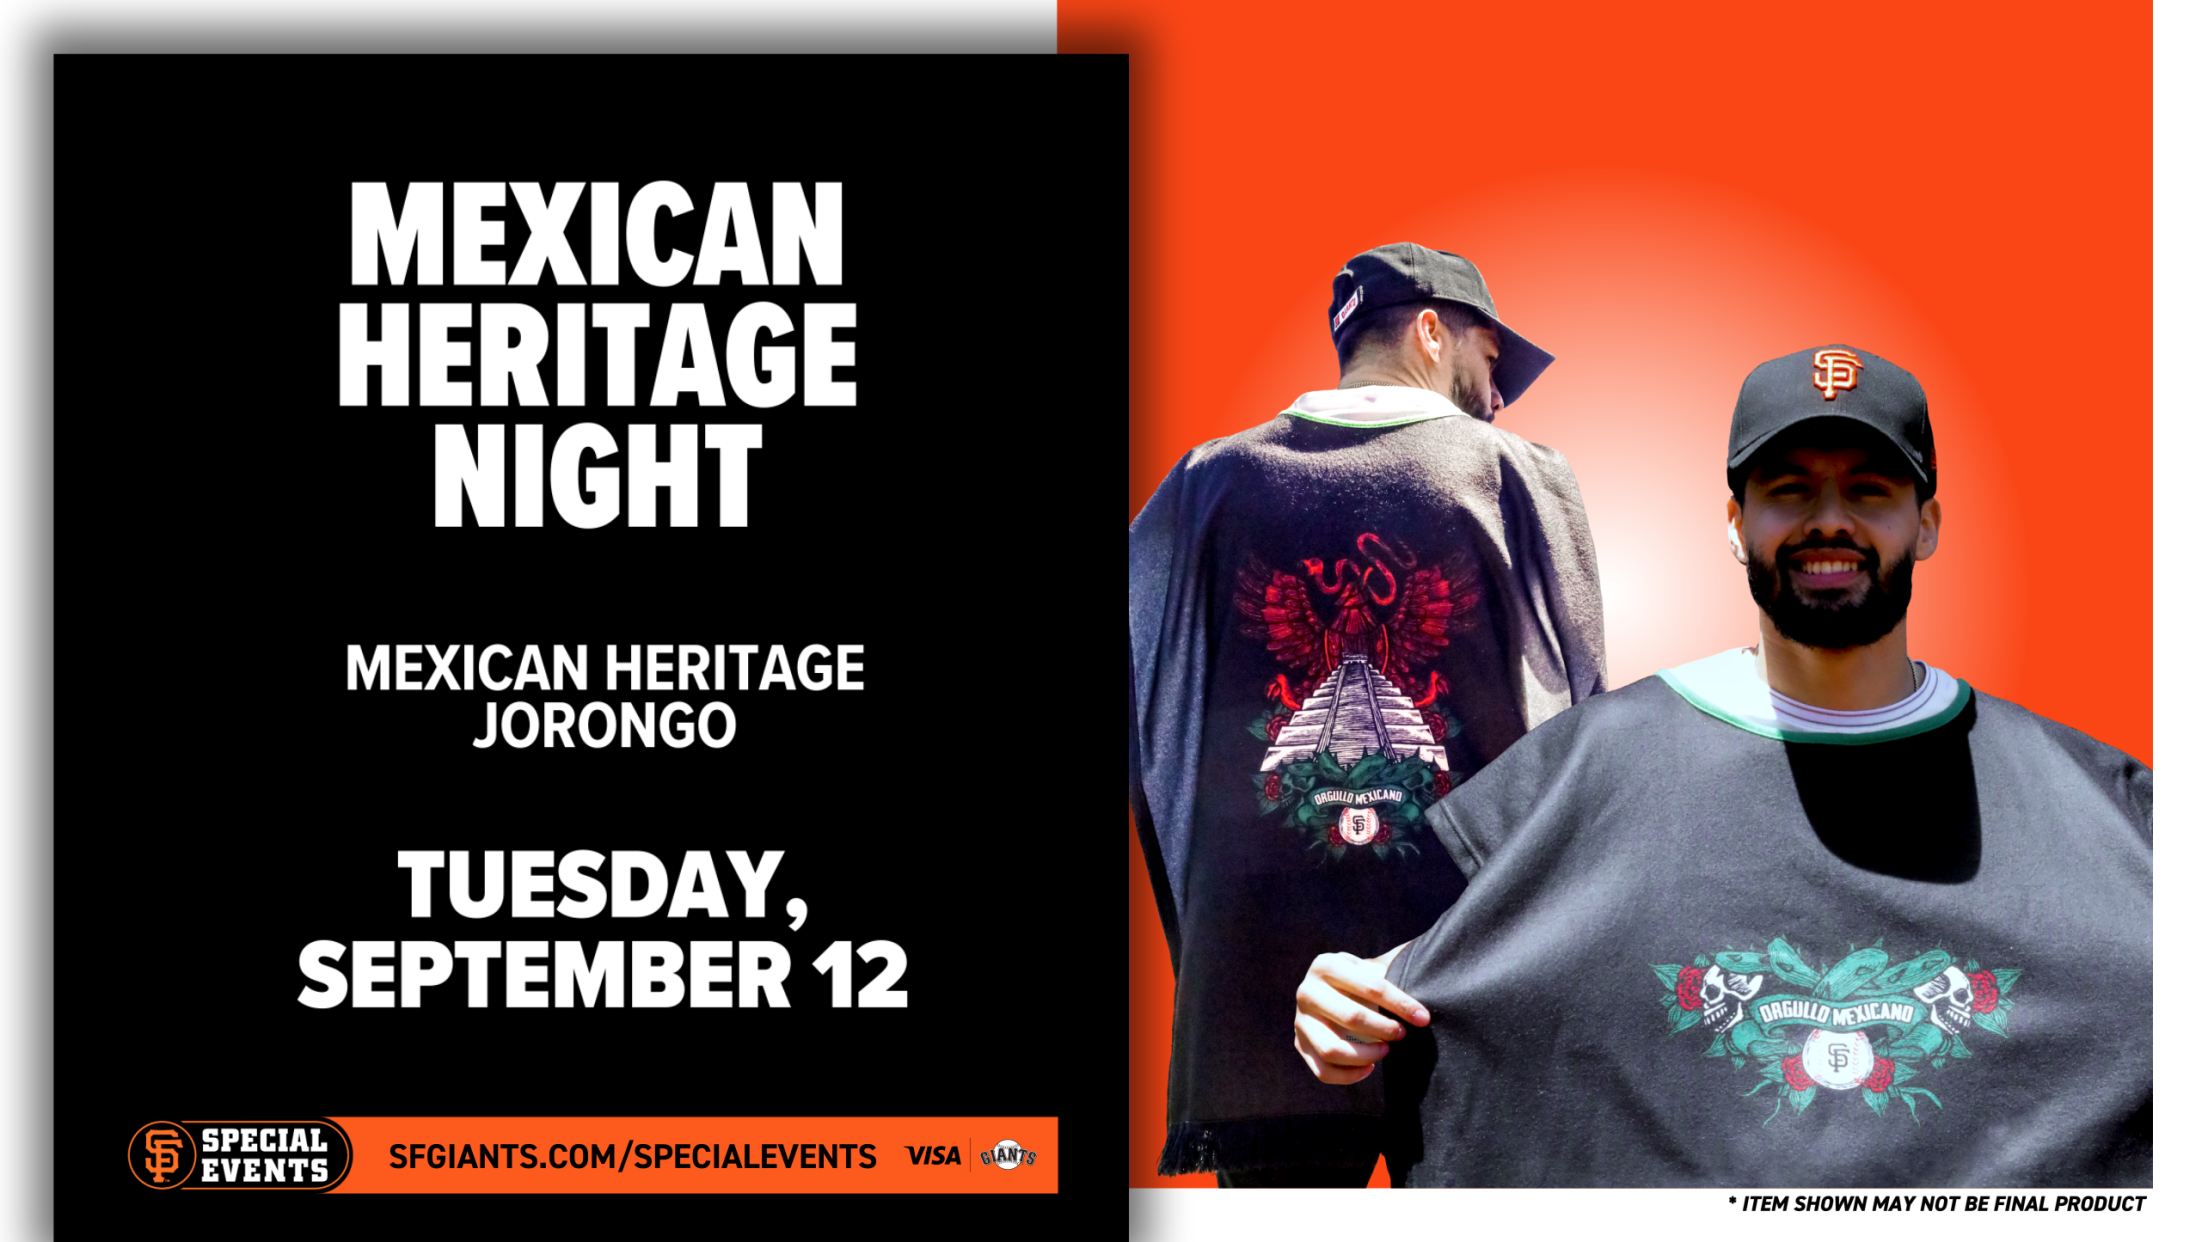 mexican heritage night